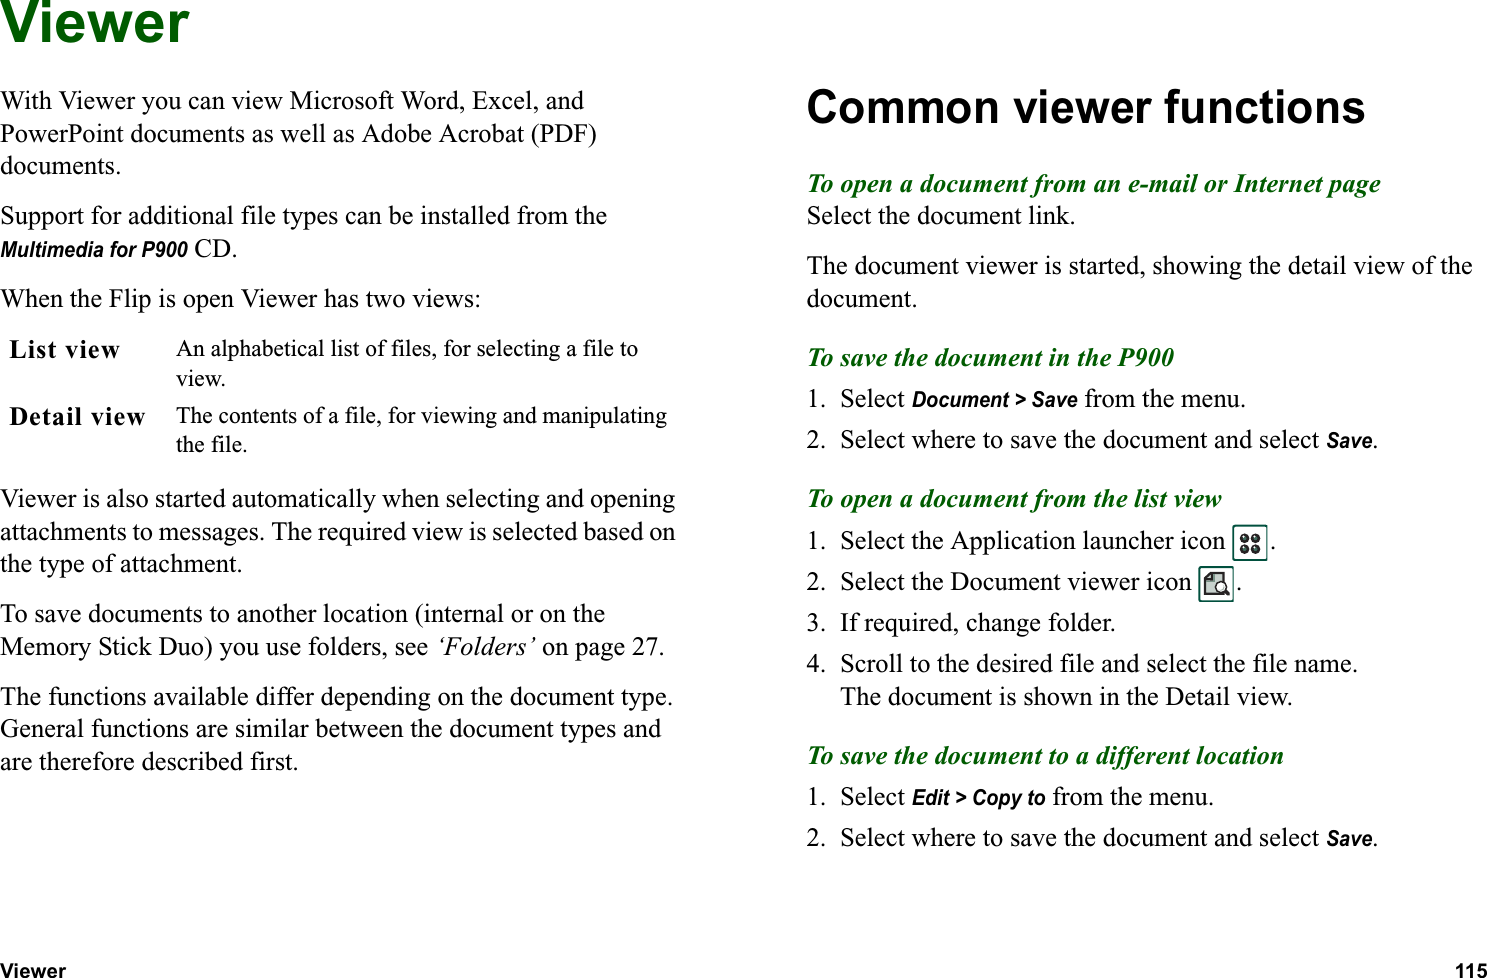 Viewer 115  ViewerWith Viewer you can view Microsoft Word, Excel, and PowerPoint documents as well as Adobe Acrobat (PDF) documents.Support for additional file types can be installed from the Multimedia for P900 CD.When the Flip is open Viewer has two views:Viewer is also started automatically when selecting and opening attachments to messages. The required view is selected based on the type of attachment.To save documents to another location (internal or on the Memory Stick Duo) you use folders, see ‘Folders’ on page 27.The functions available differ depending on the document type. General functions are similar between the document types and are therefore described first.Common viewer functionsTo open a document from an e-mail or Internet pageSelect the document link.The document viewer is started, showing the detail view of the document.To save the document in the P9001. Select Document &gt; Save from the menu.2. Select where to save the document and select Save.To open a document from the list view1. Select the Application launcher icon  .2. Select the Document viewer icon  .3. If required, change folder.4. Scroll to the desired file and select the file name.The document is shown in the Detail view.To save the document to a different location1. Select Edit &gt; Copy to from the menu.2. Select where to save the document and select Save.List view An alphabetical list of files, for selecting a file to view.Detail view The contents of a file, for viewing and manipulating the file.